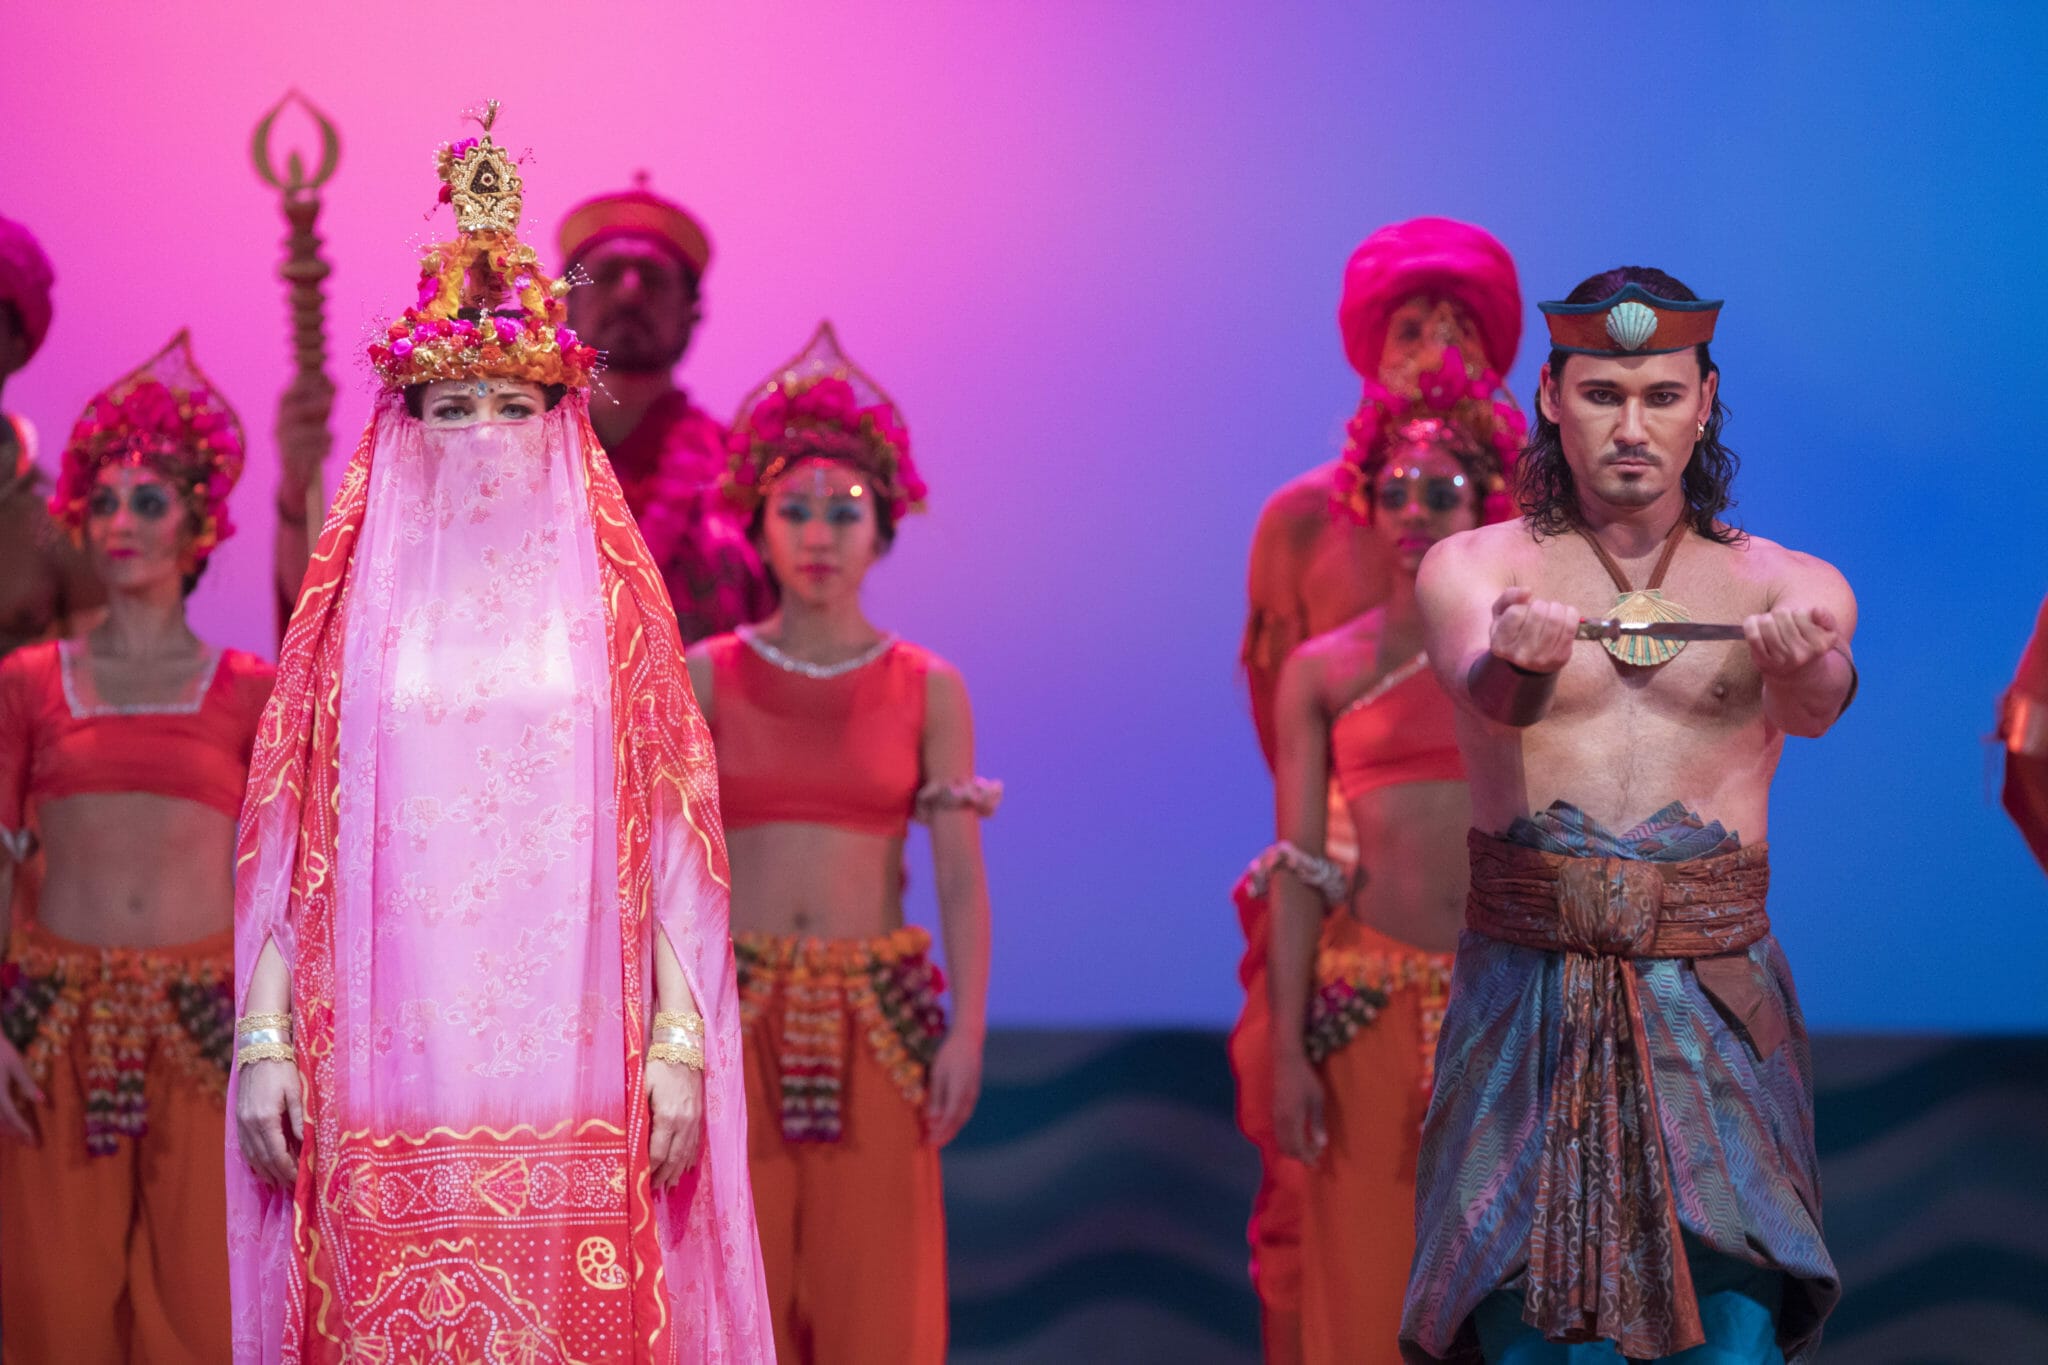 Lyric Opera of Chicago THE PEARL FISHERS